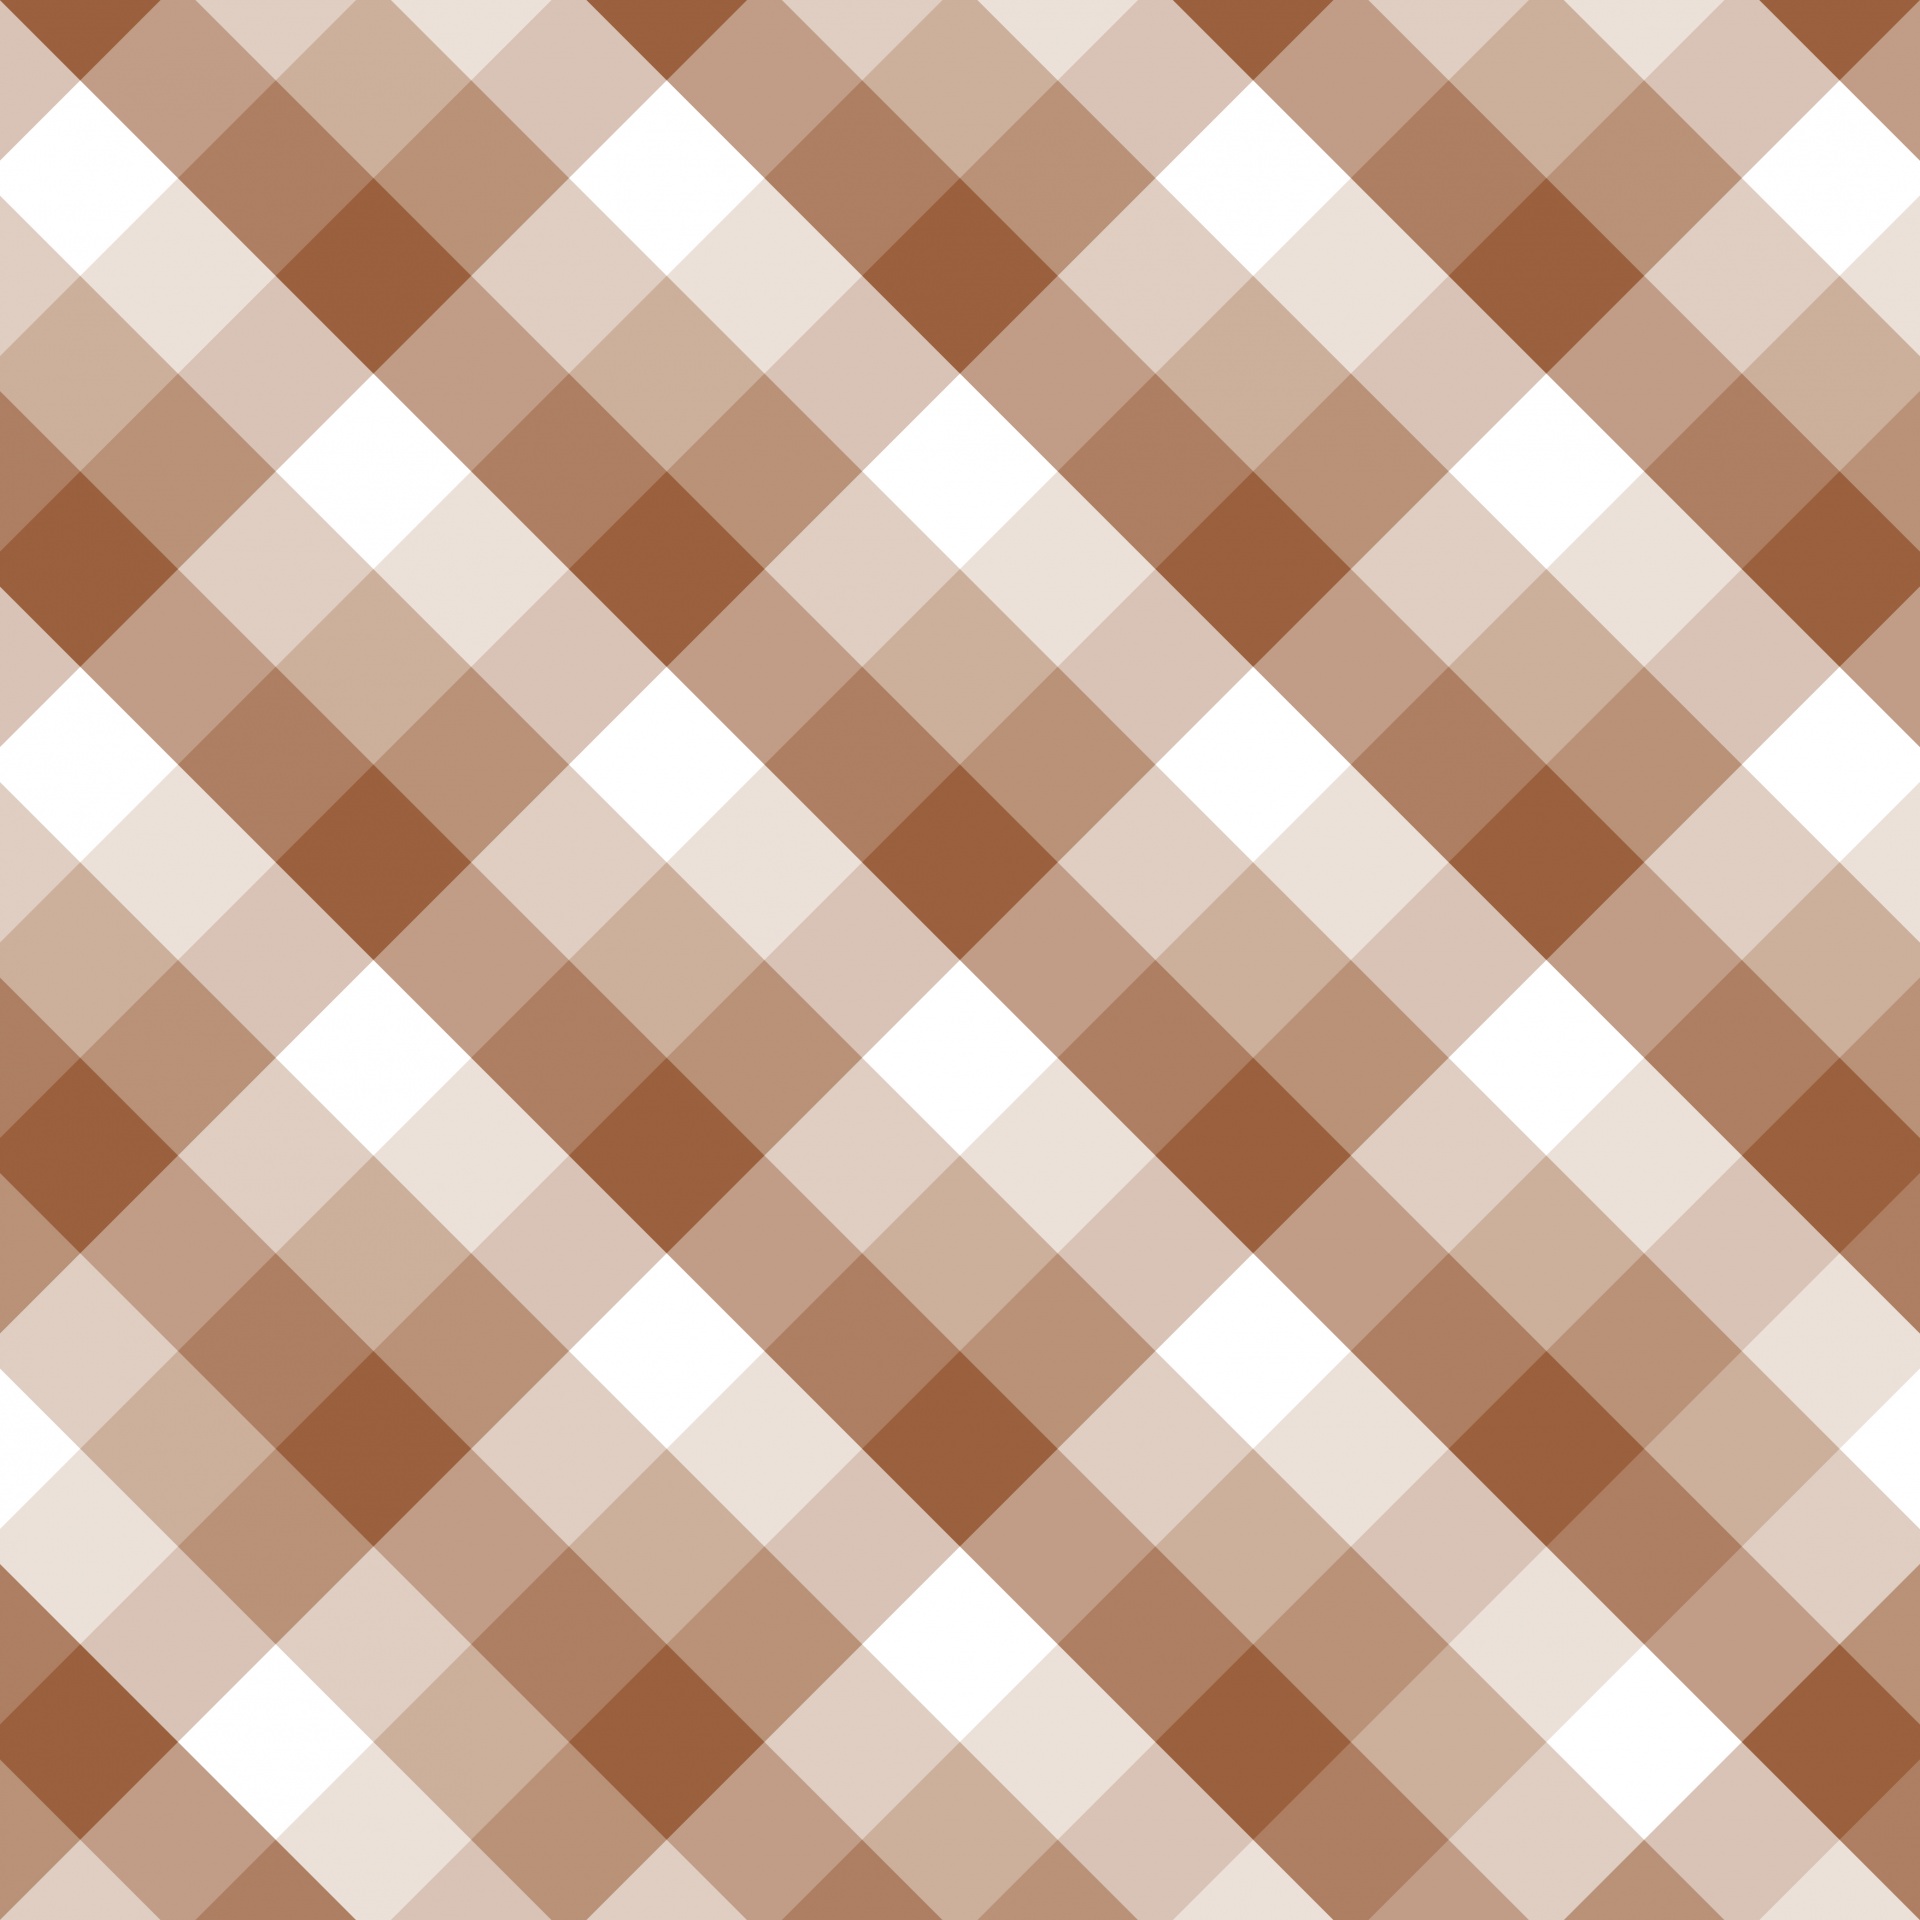 Download free photo of Check,checks,checked,brown,white - from 